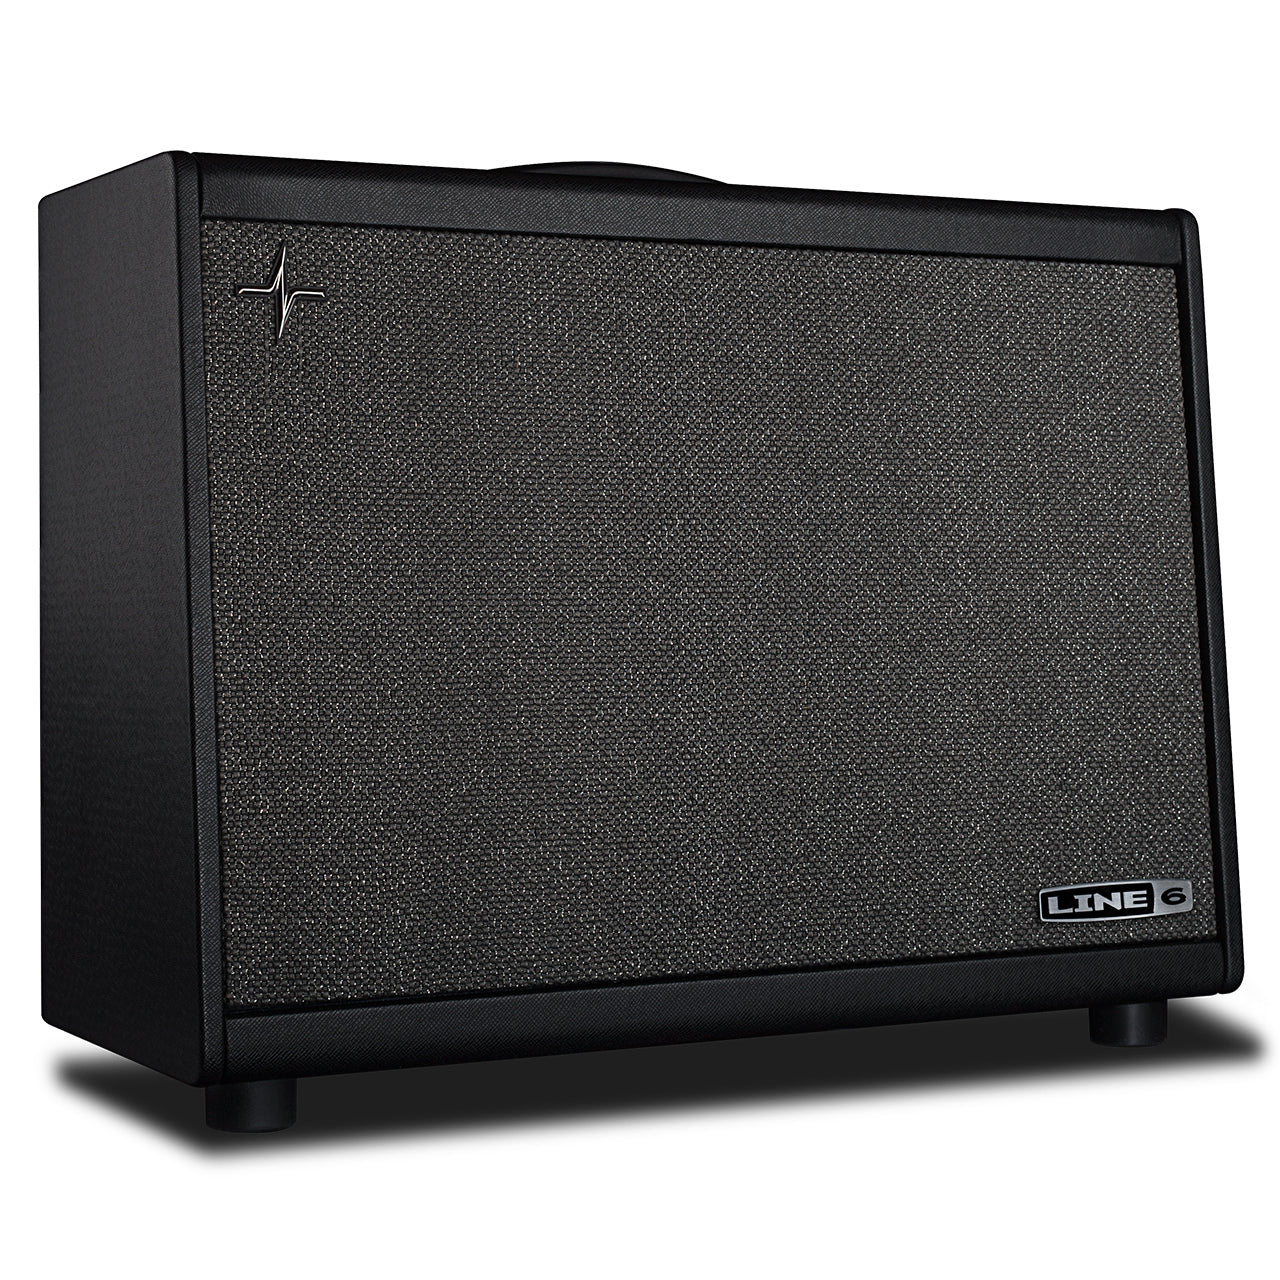 Line 6 Powercab 112 Plus Active Speaker System, angle